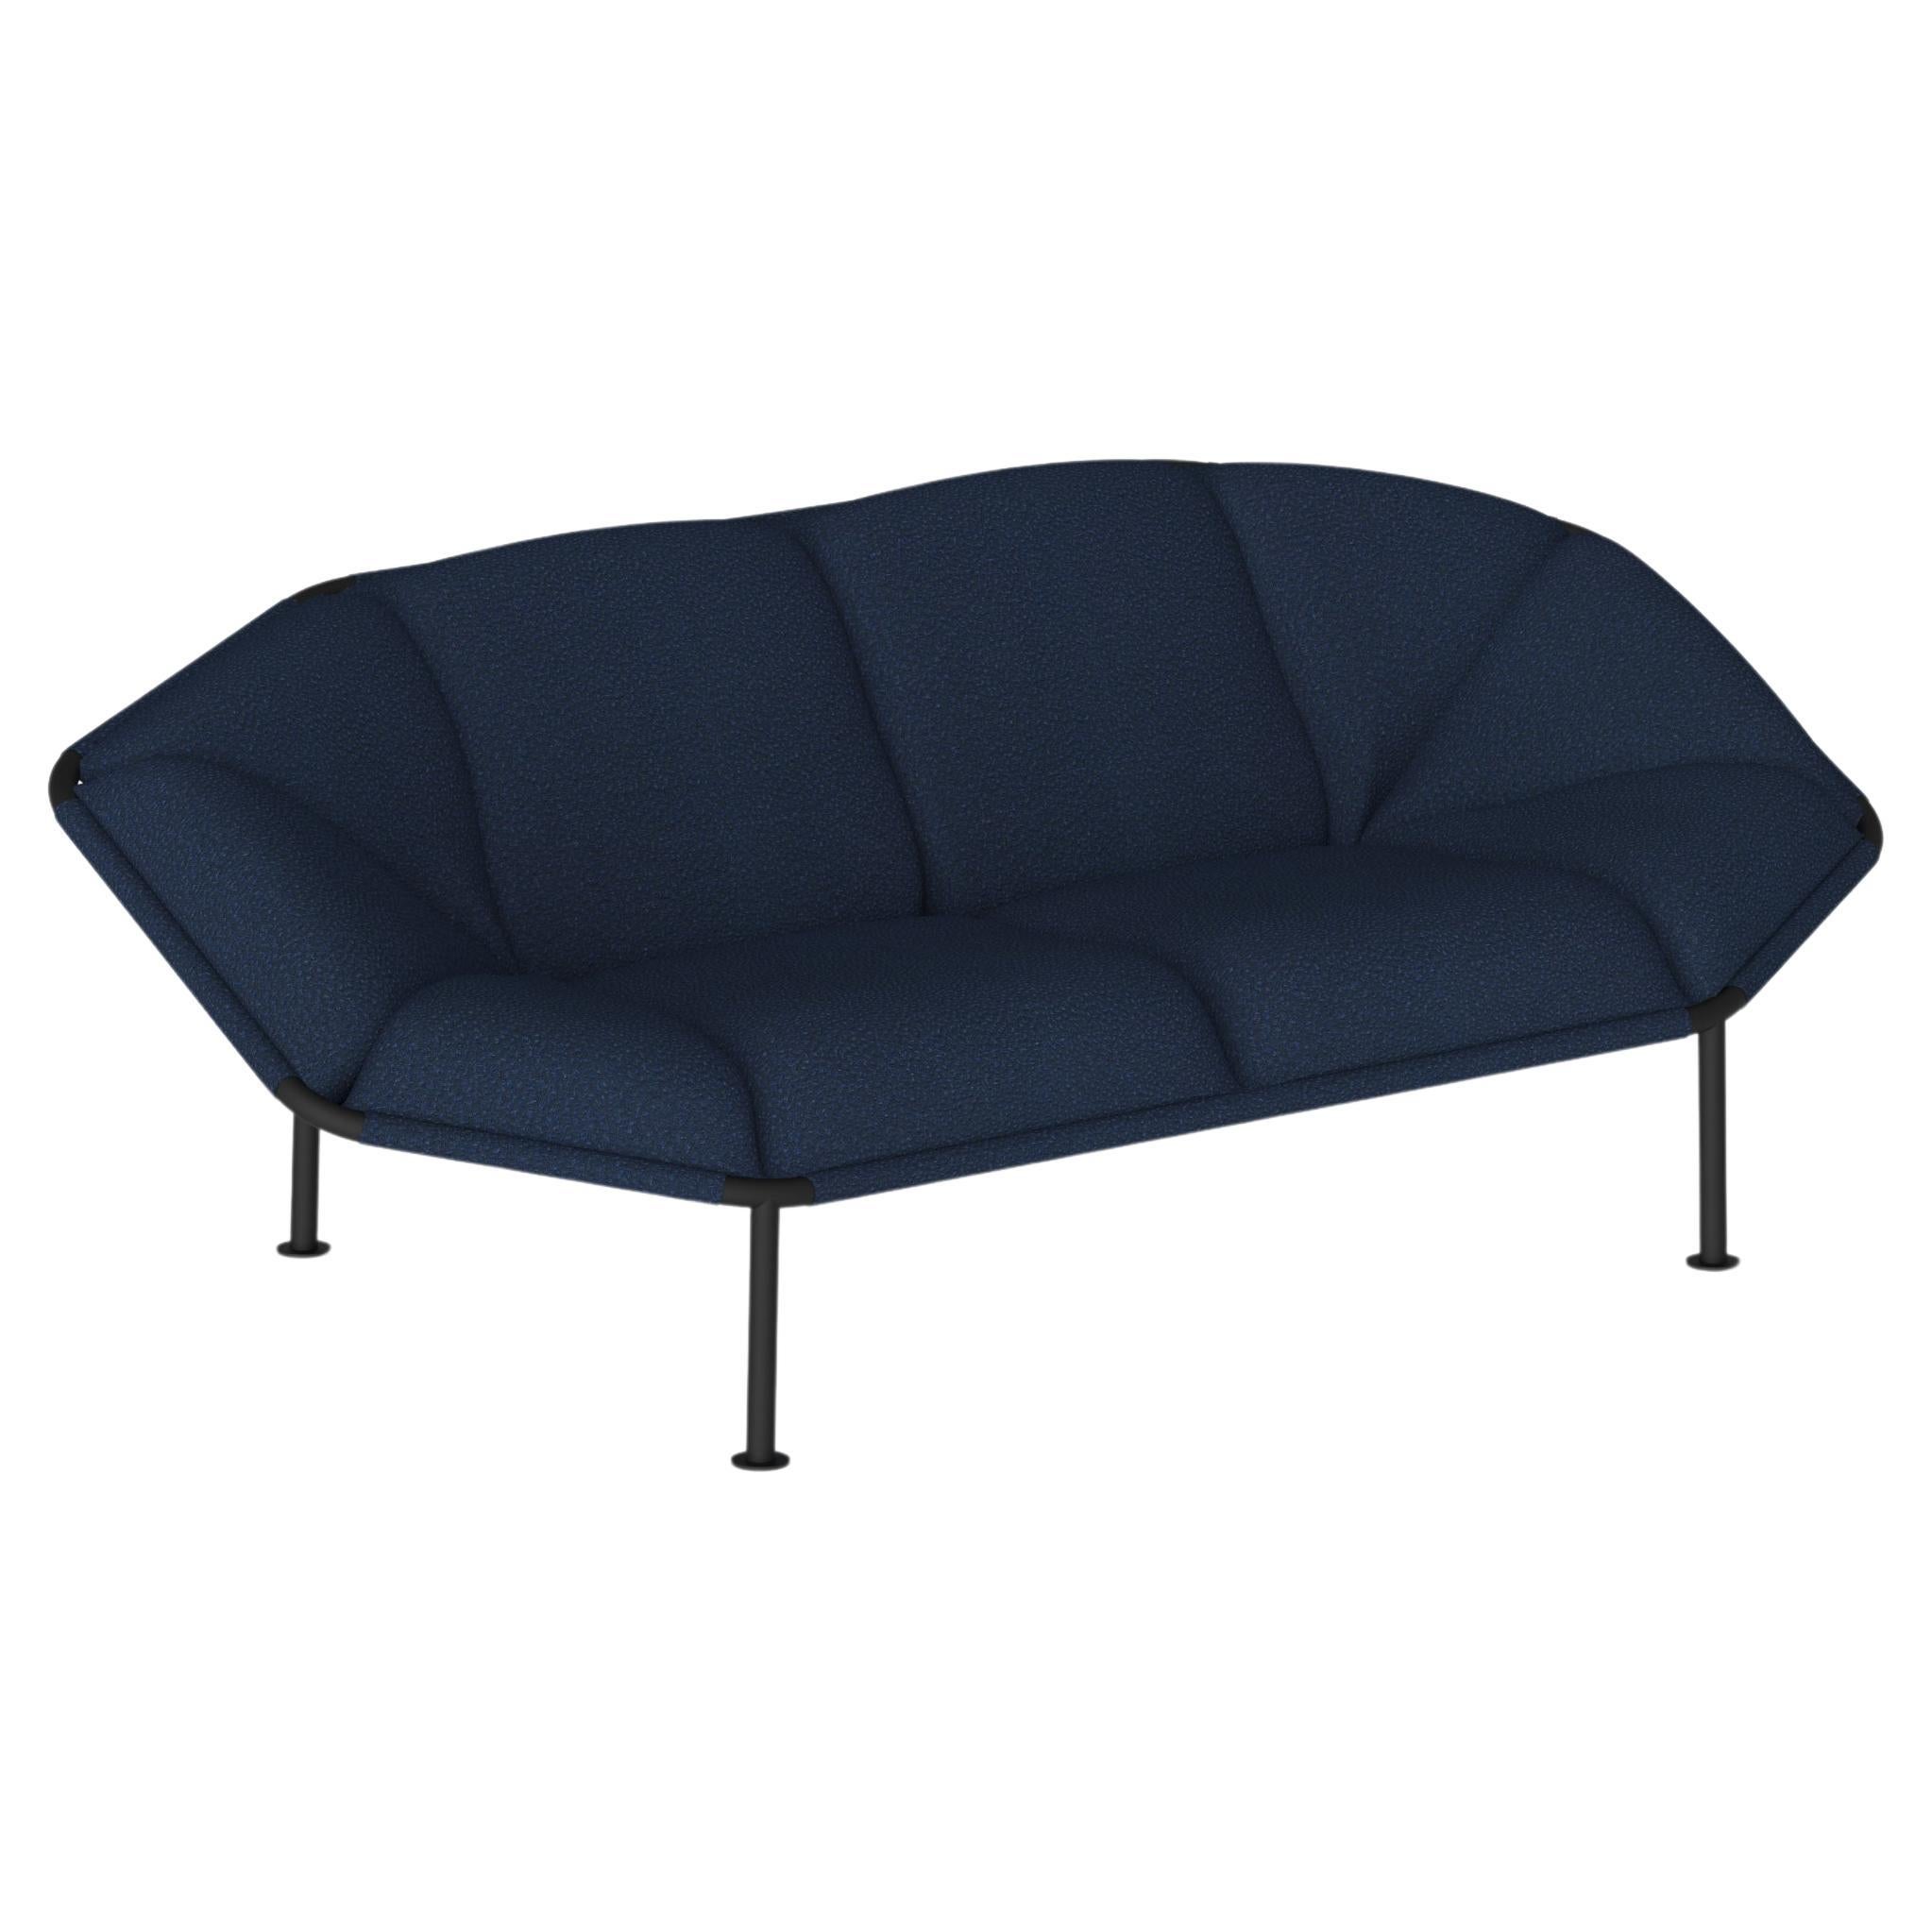 What Colours go with navy blue sofa?